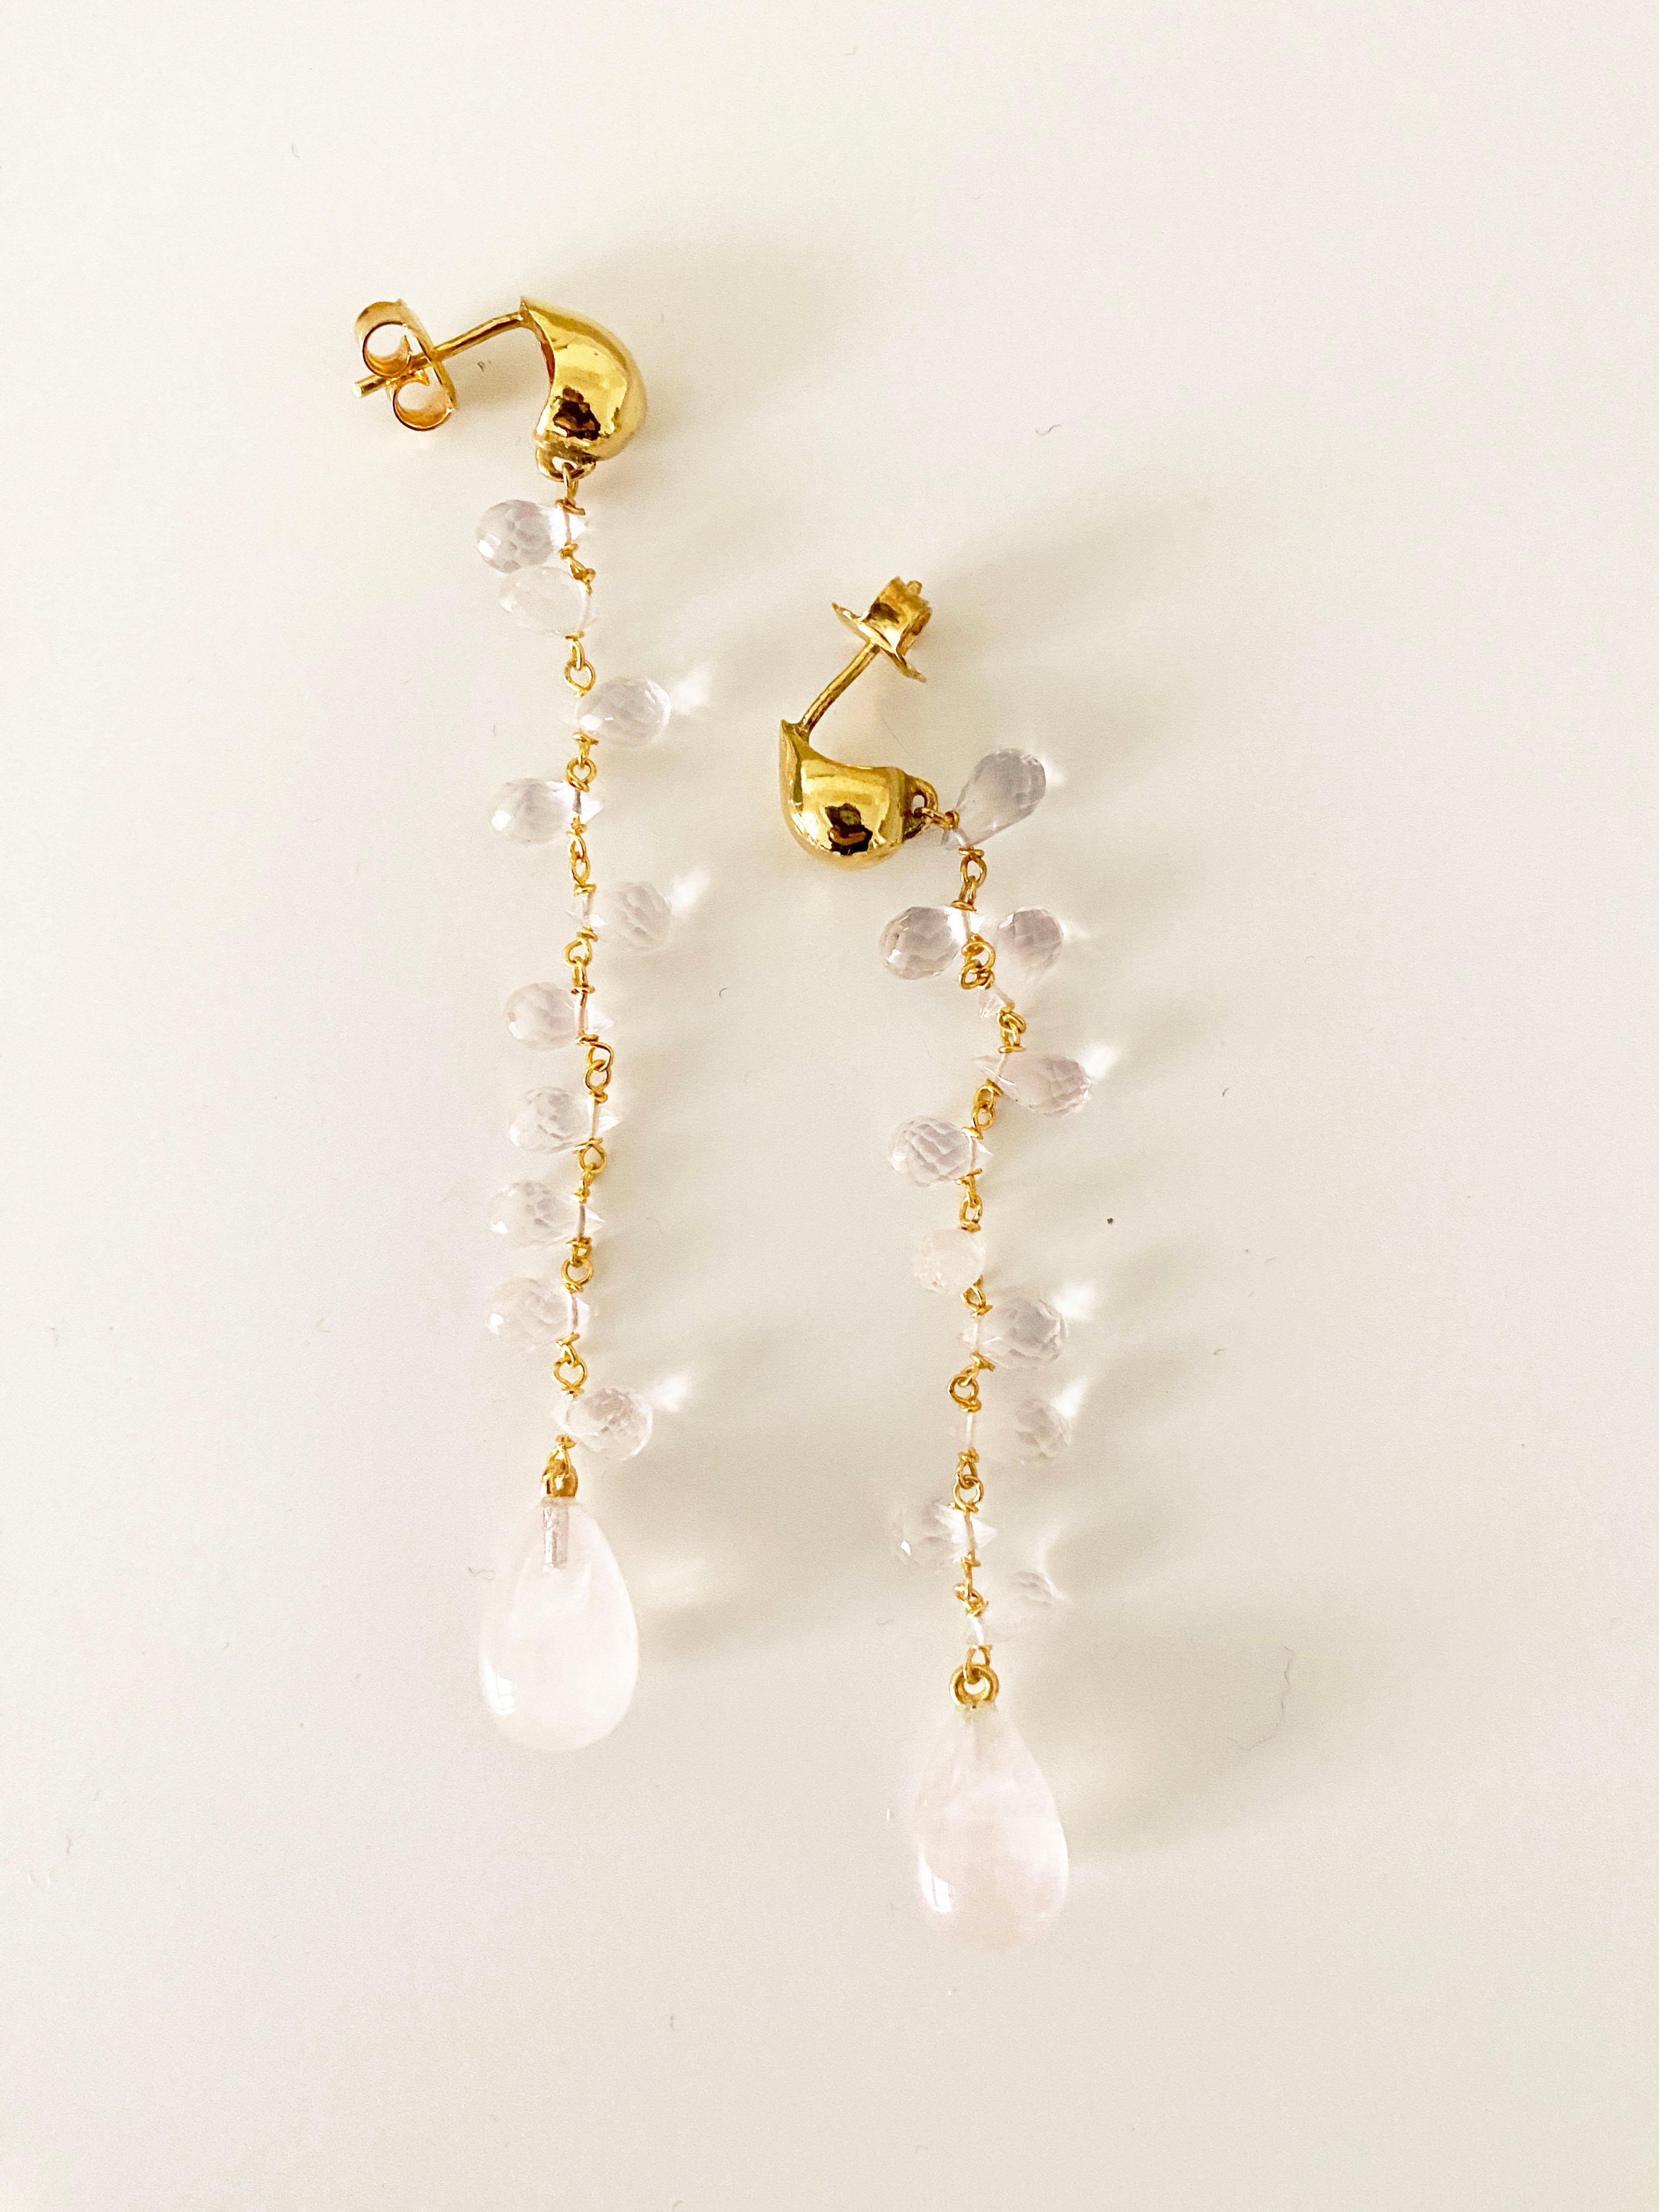 Artisan Rossella Ugolini Rose Quartz 18K Yellow Gold Delicate Unique Jointed Earrings For Sale